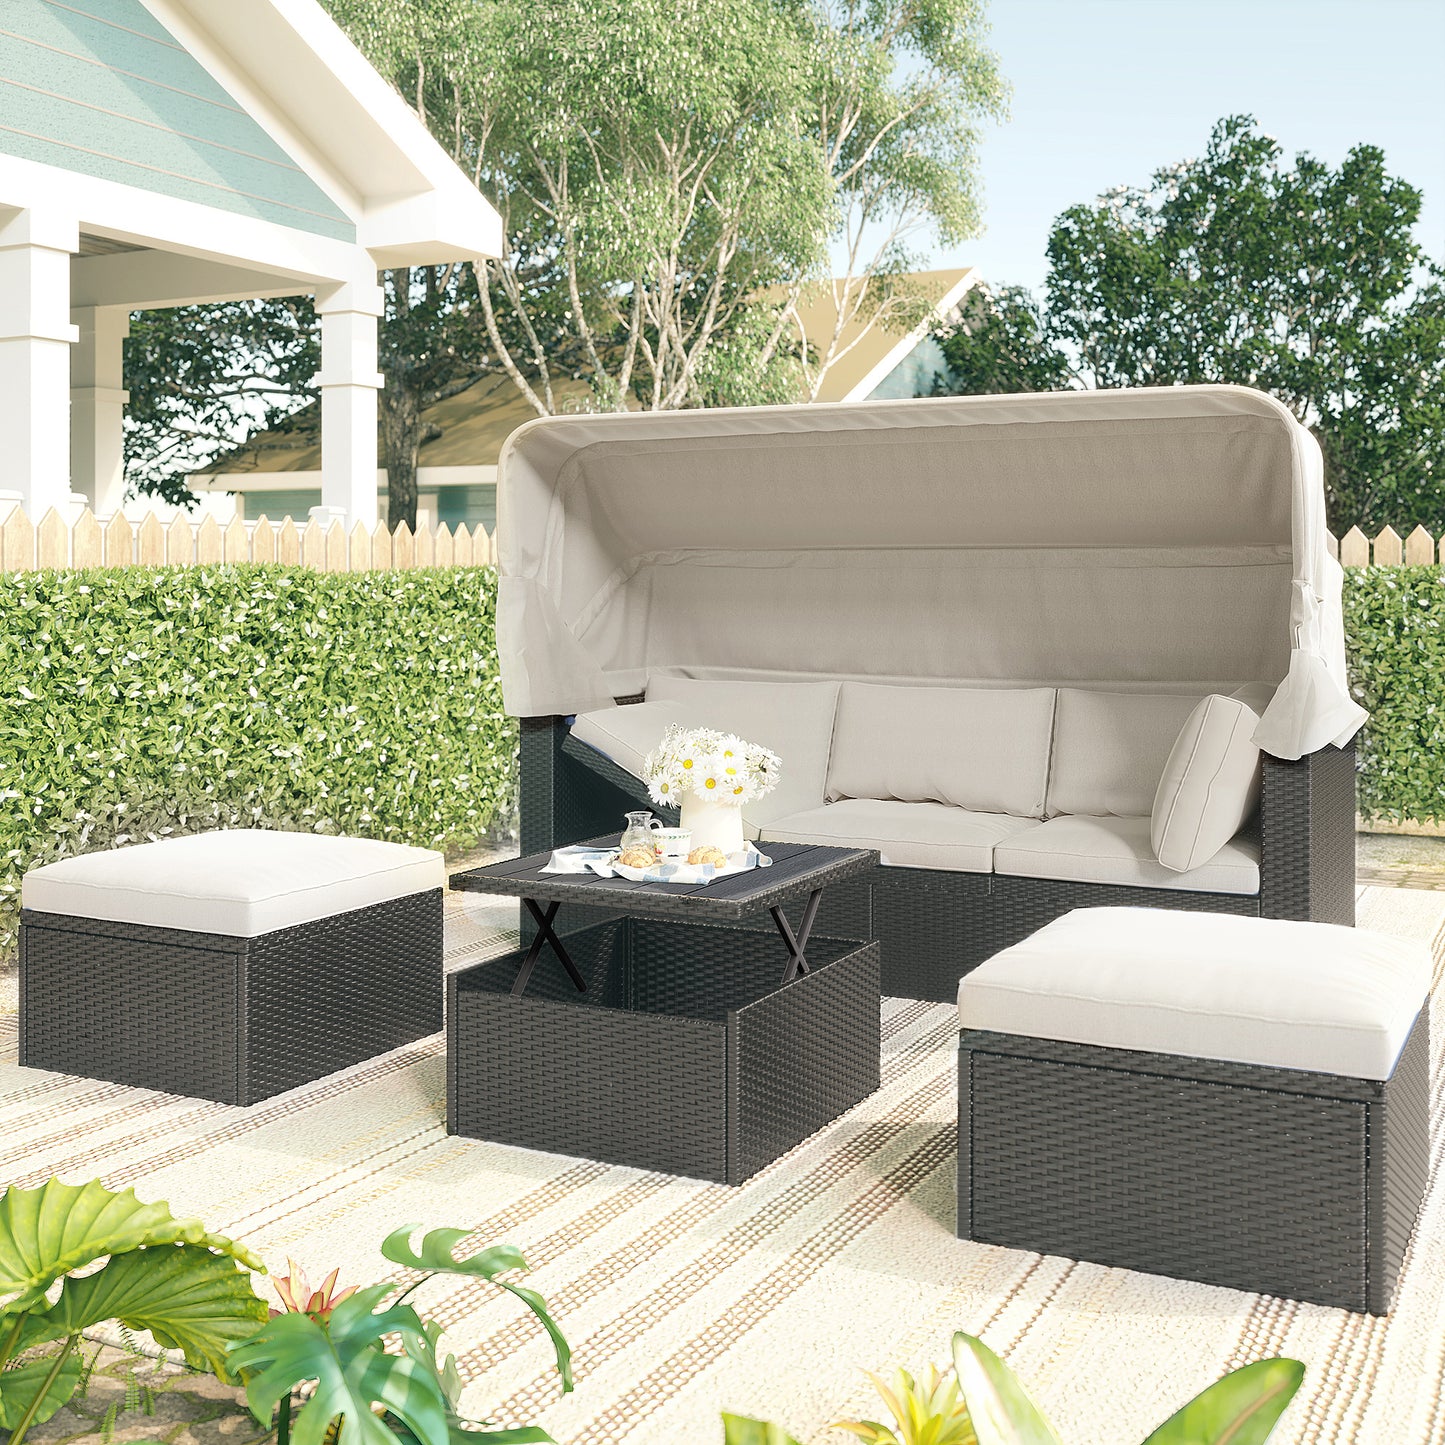 Outdoor Patio Rectangle Daybed with Retractable Canopy;  Wicker Furniture Sectional Seating with Washable Cushions;  Backyard;  Porch